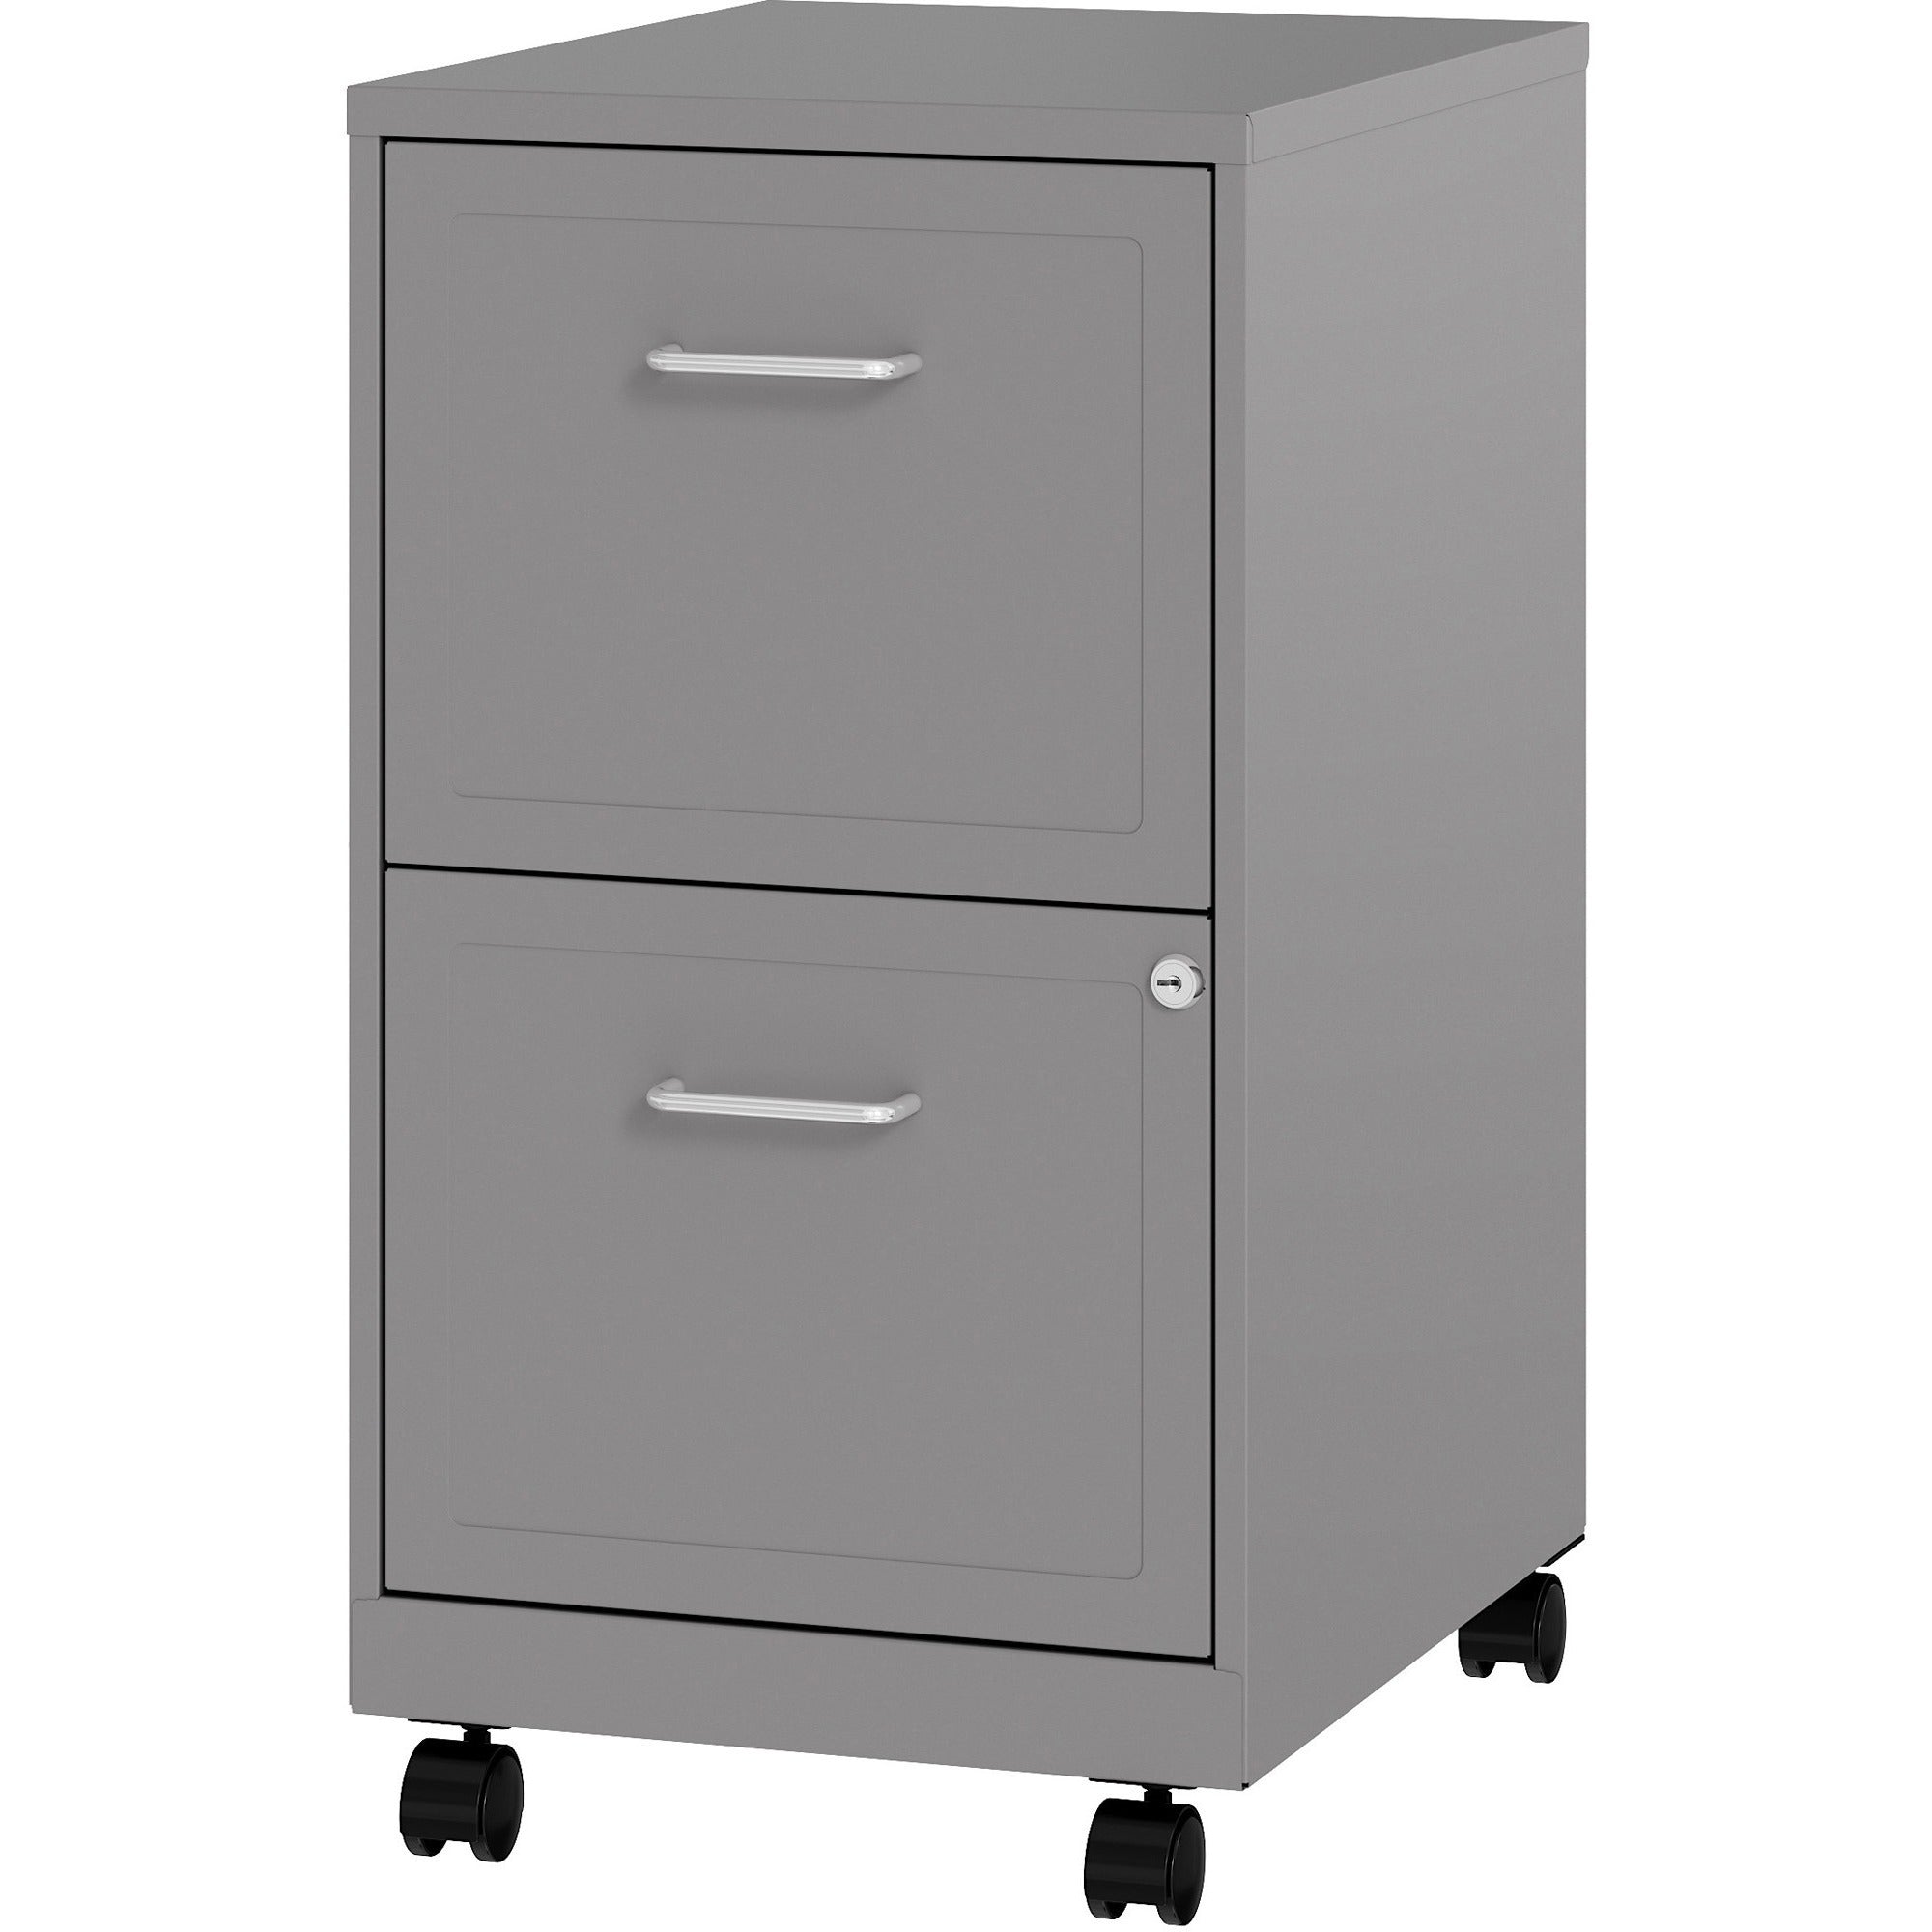 nusparc-mobile-file-cabinet-142-x-18-x-265-for-file-letter-mobility-locking-drawer-glide-suspension-3-4-drawer-extension-cam-lock-nonporous-surface-silver-painted-steel-steel-recycled_nprvf218amsr - 3